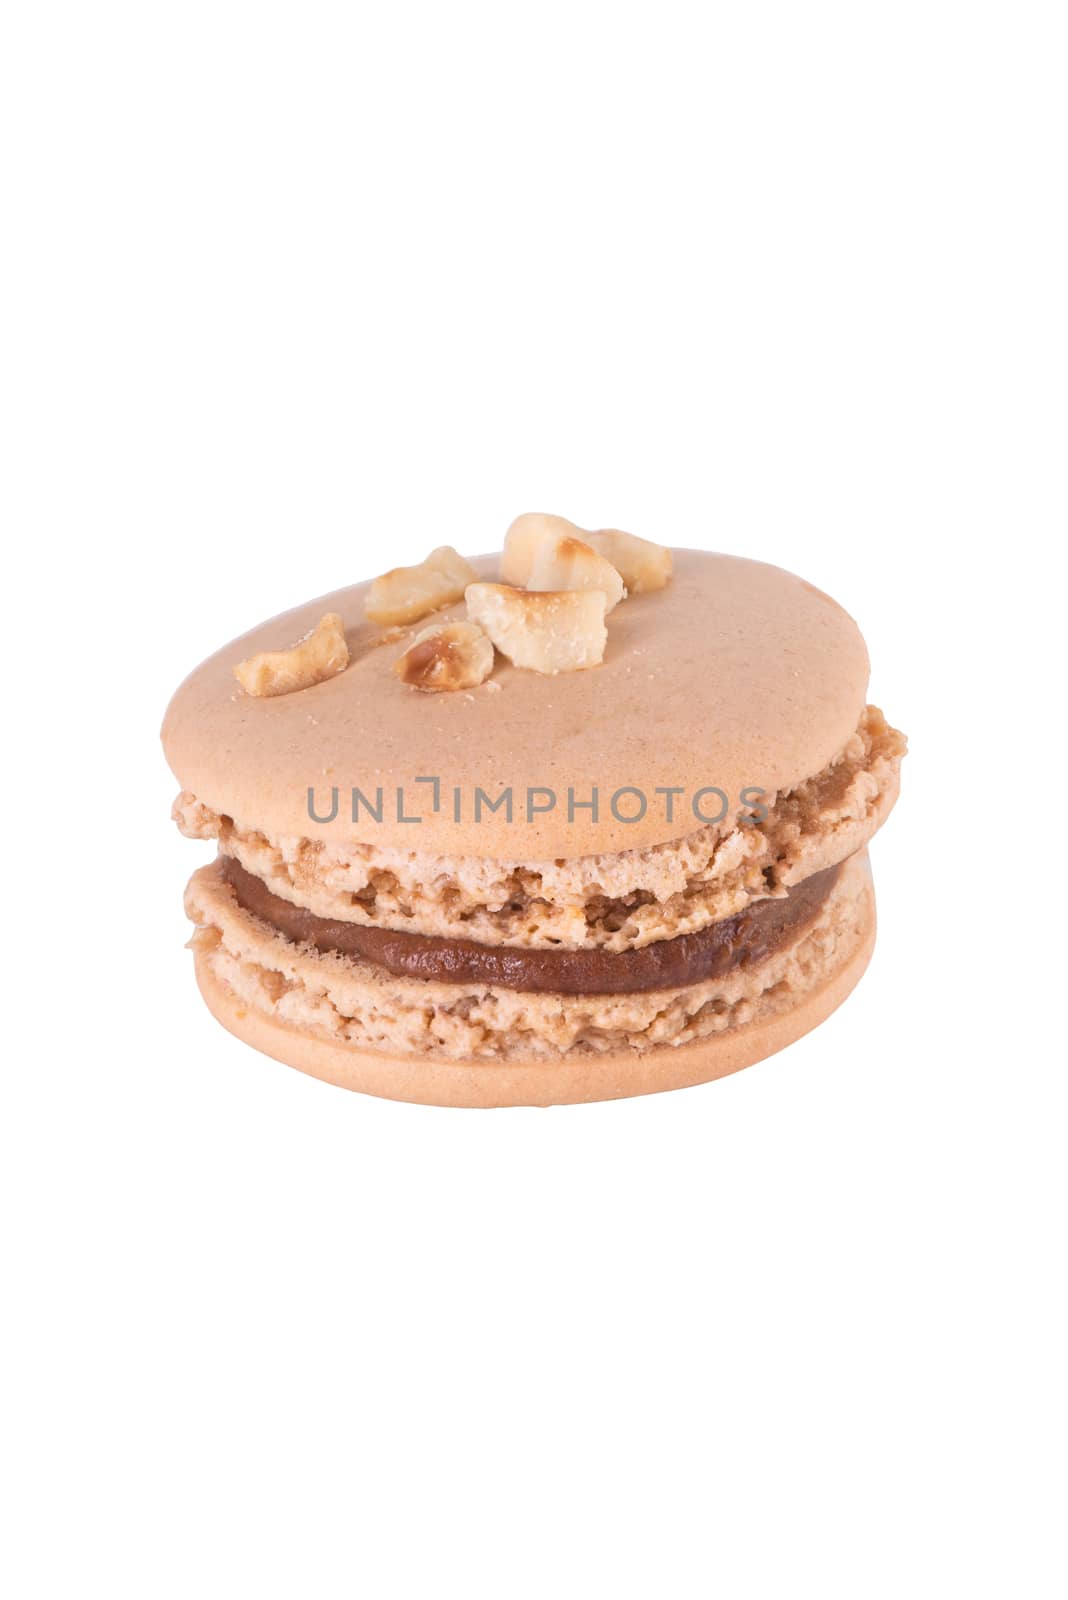 French Macaroon Cookie Isolated on White Background. Close Up Studio Photo.